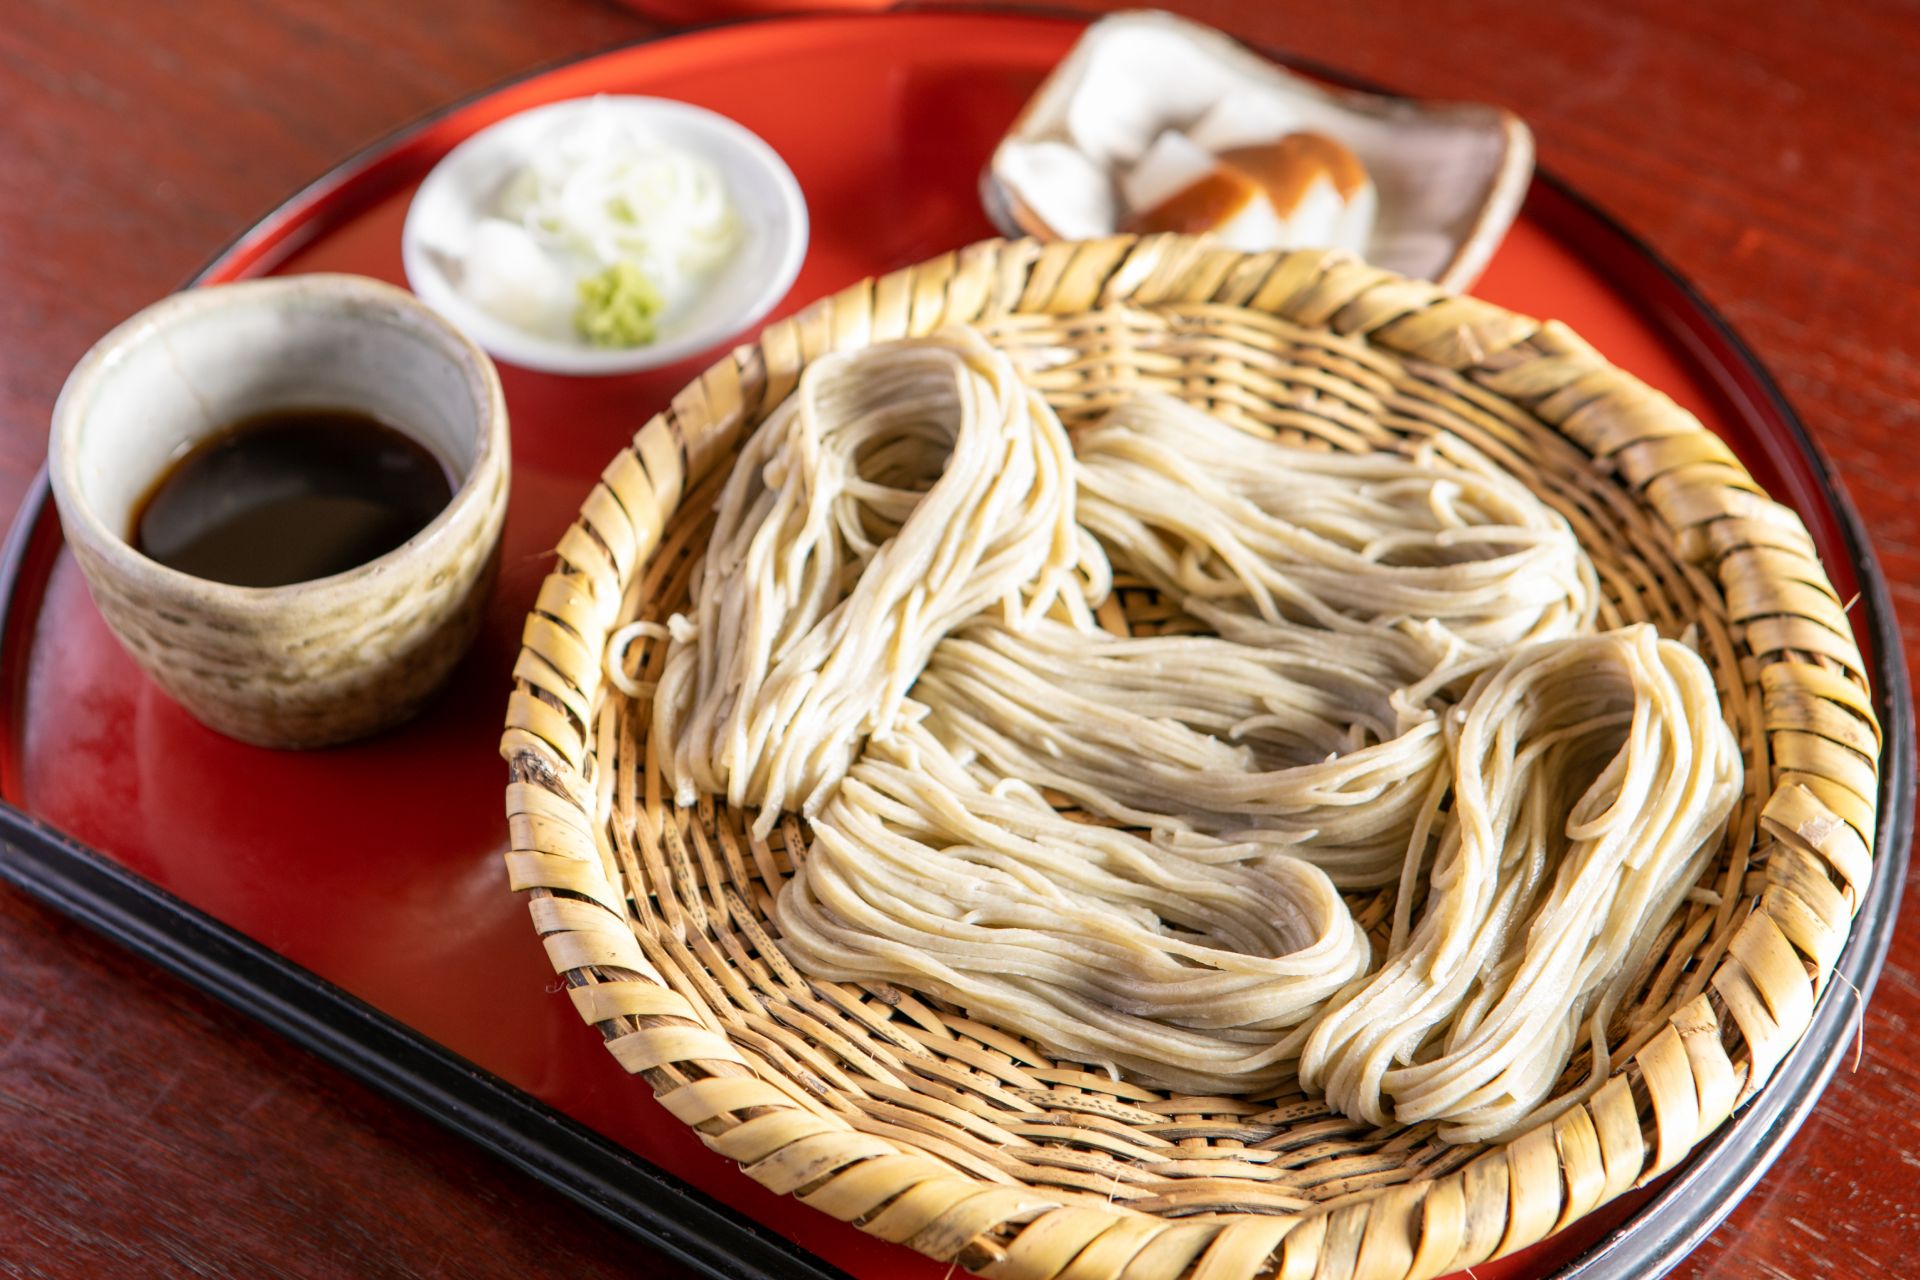 At Yamato-an, the skilled proprietor uses high-quality buckwheat flour and wasabi from Shinshu (the old name for the area that is now Nagano Prefecture).